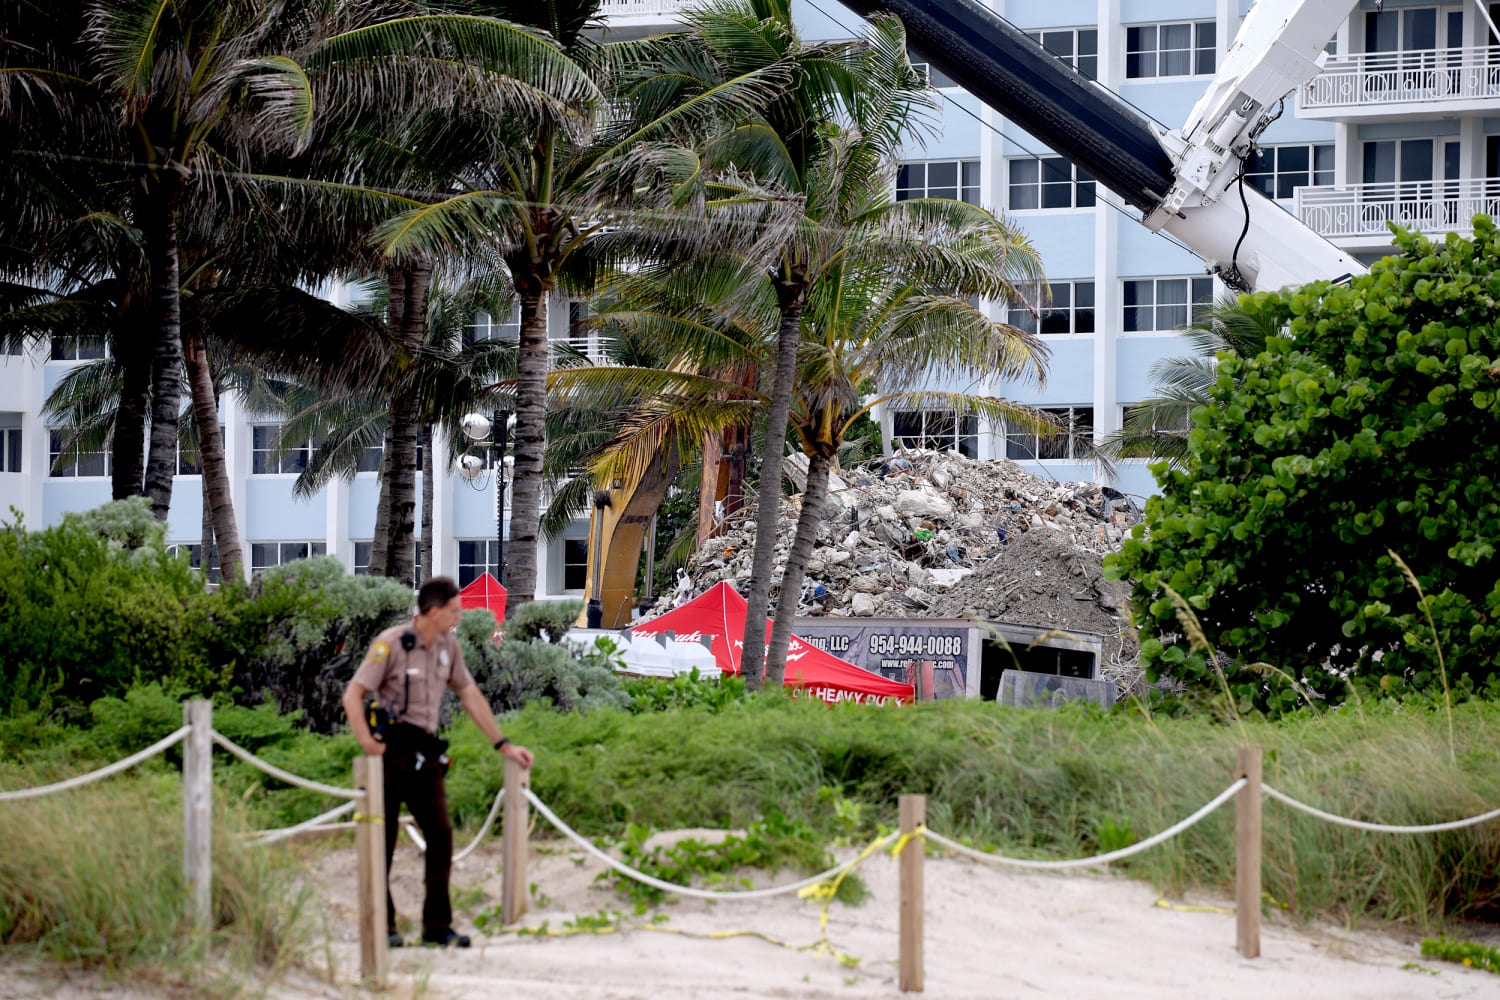 1-year-old girl is one of the latest victims identified in Surfside condo collapse